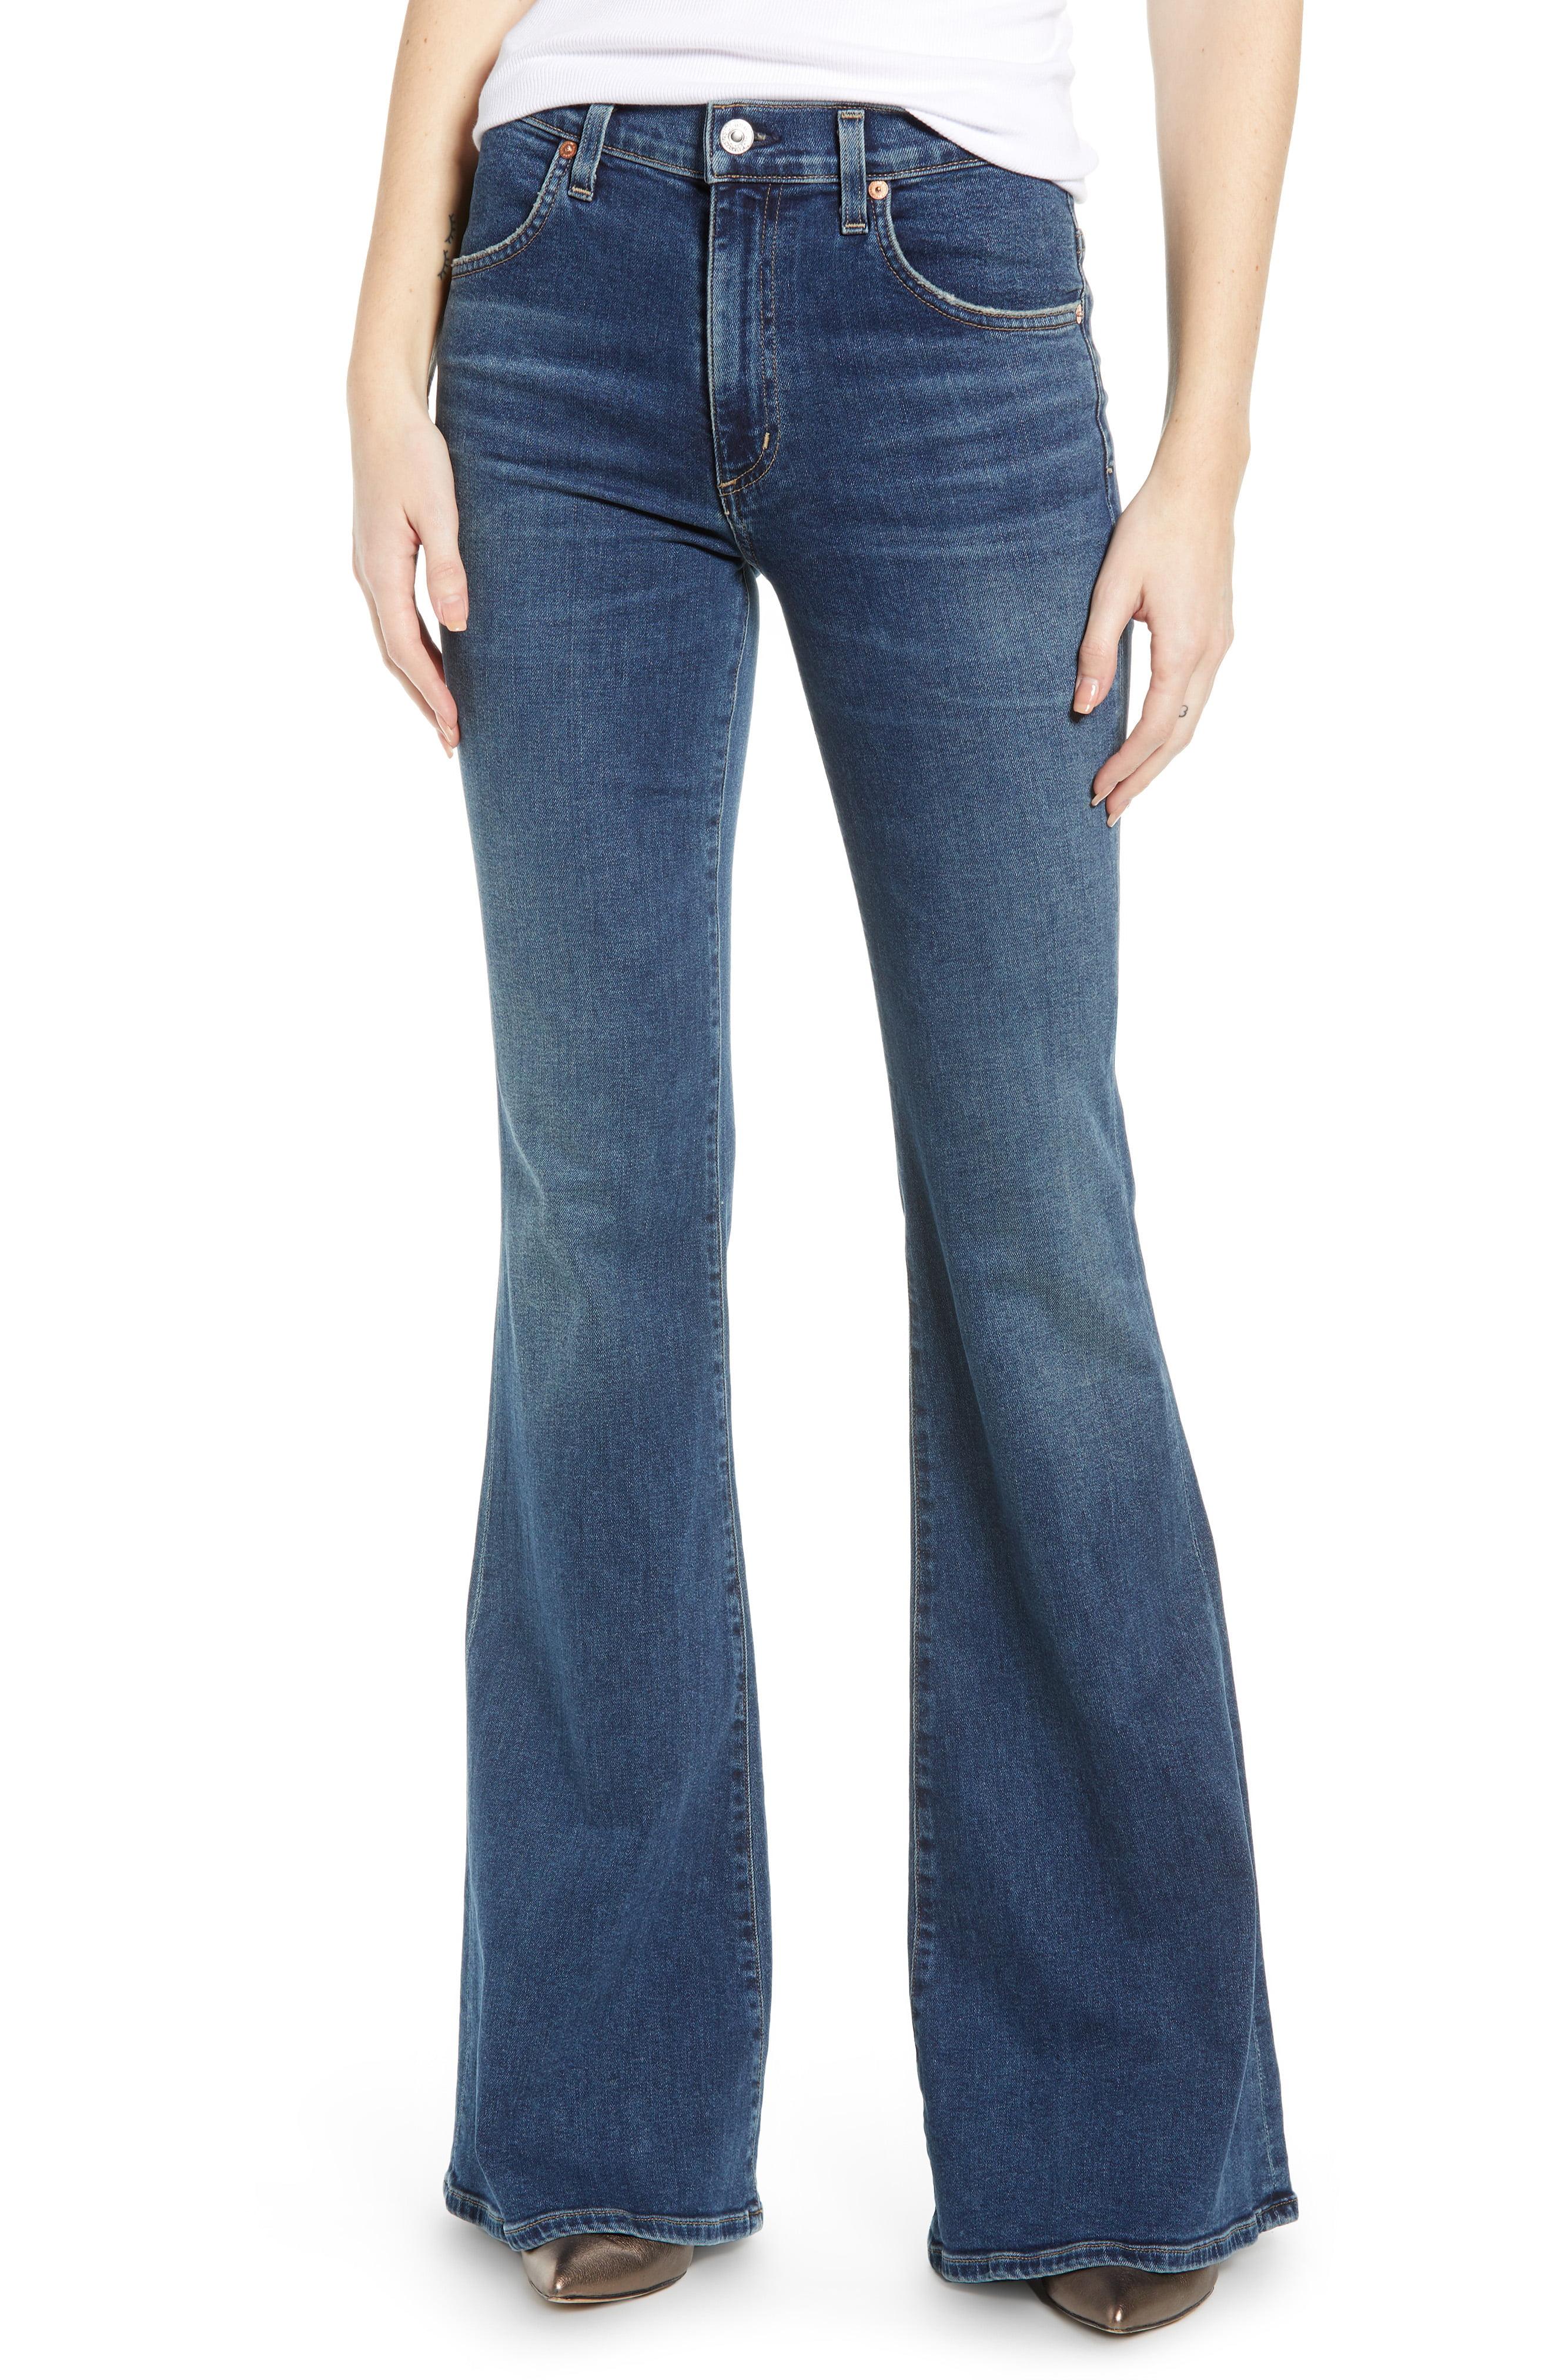 Lyst - Citizens of Humanity Chloe High Waist Flare Jeans in Blue